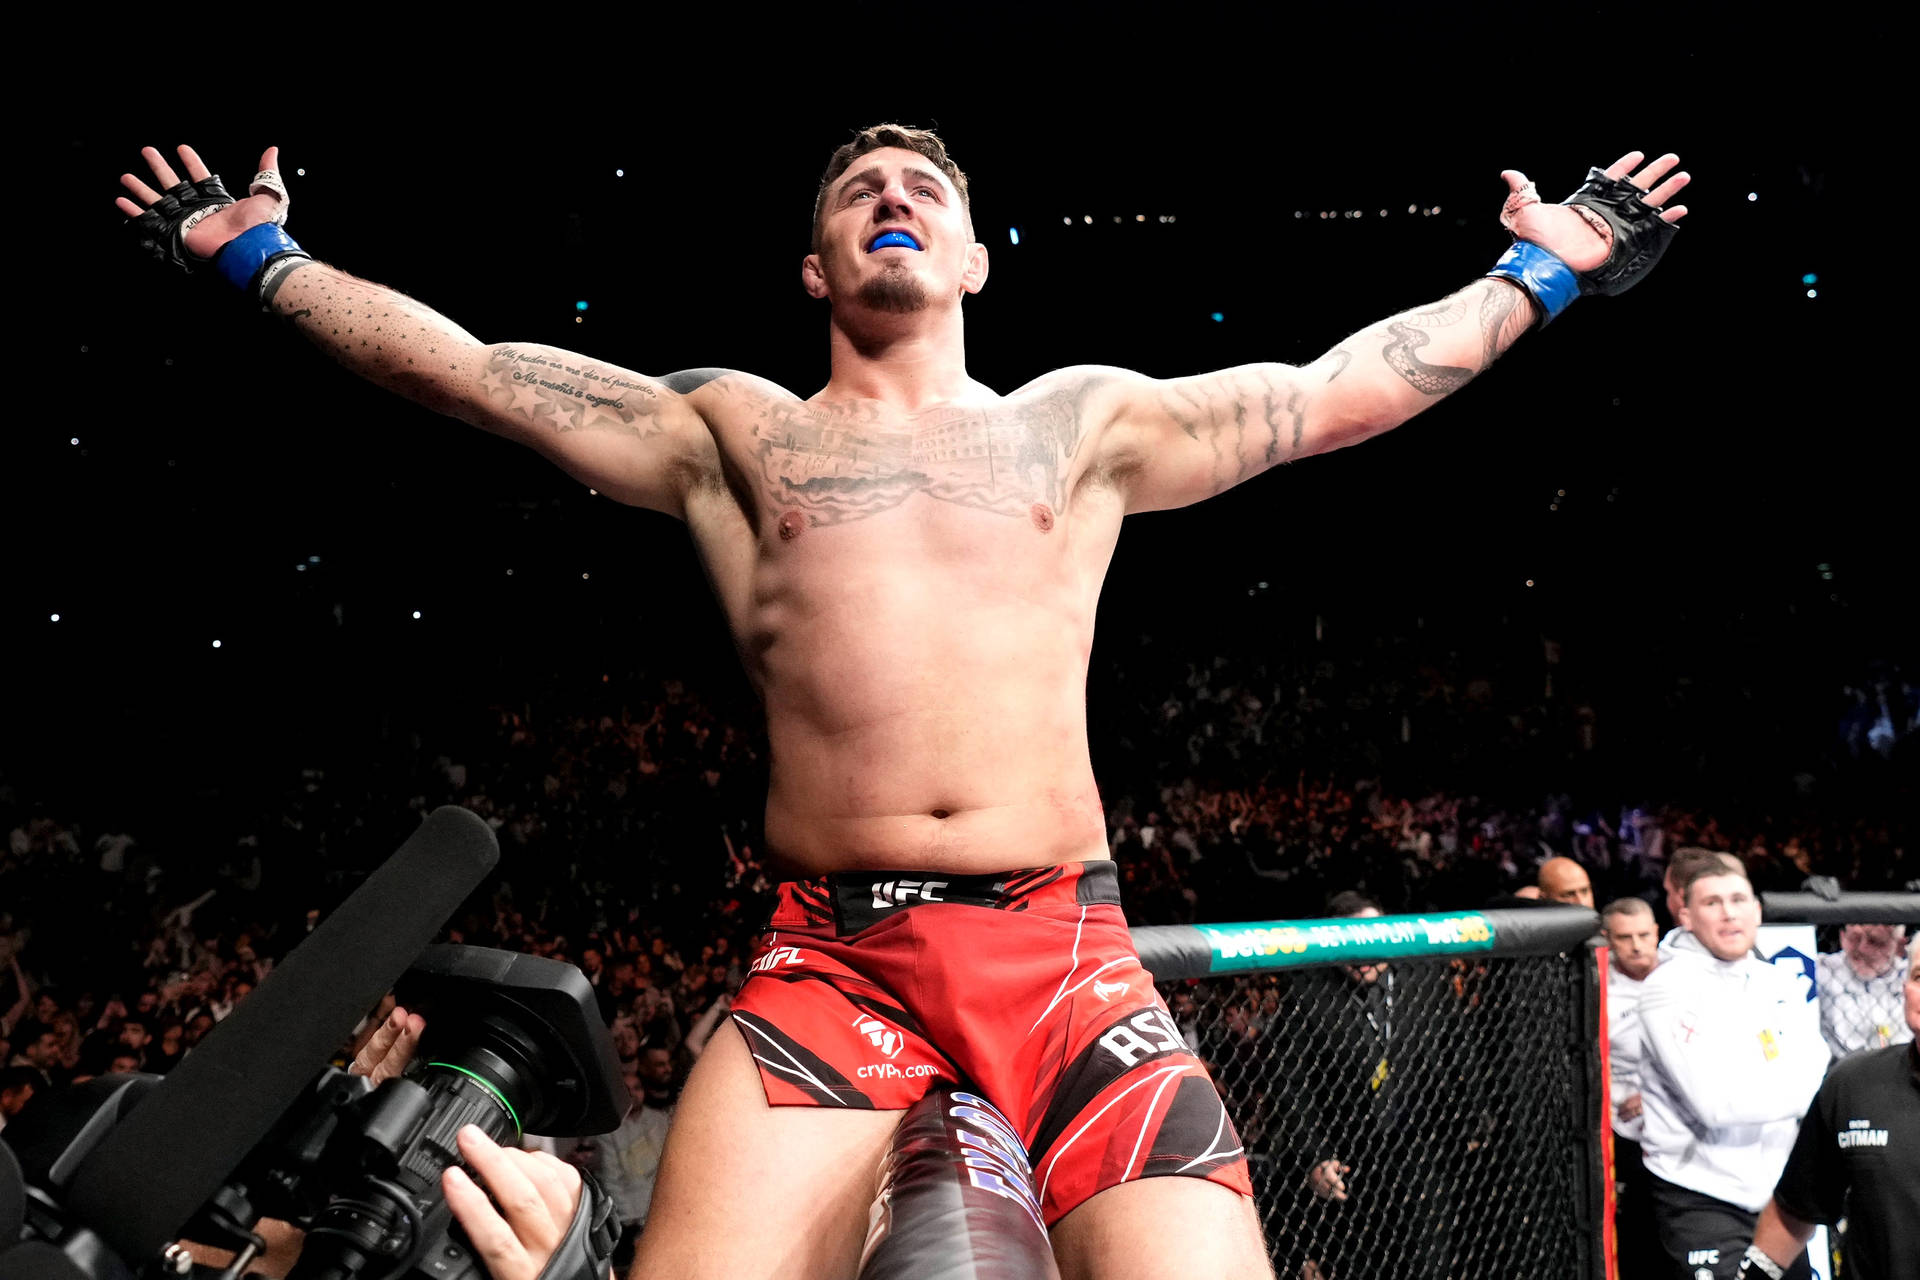 Inspiring moment as MMA fighter Tom Aspinall celebrates victory Wallpaper